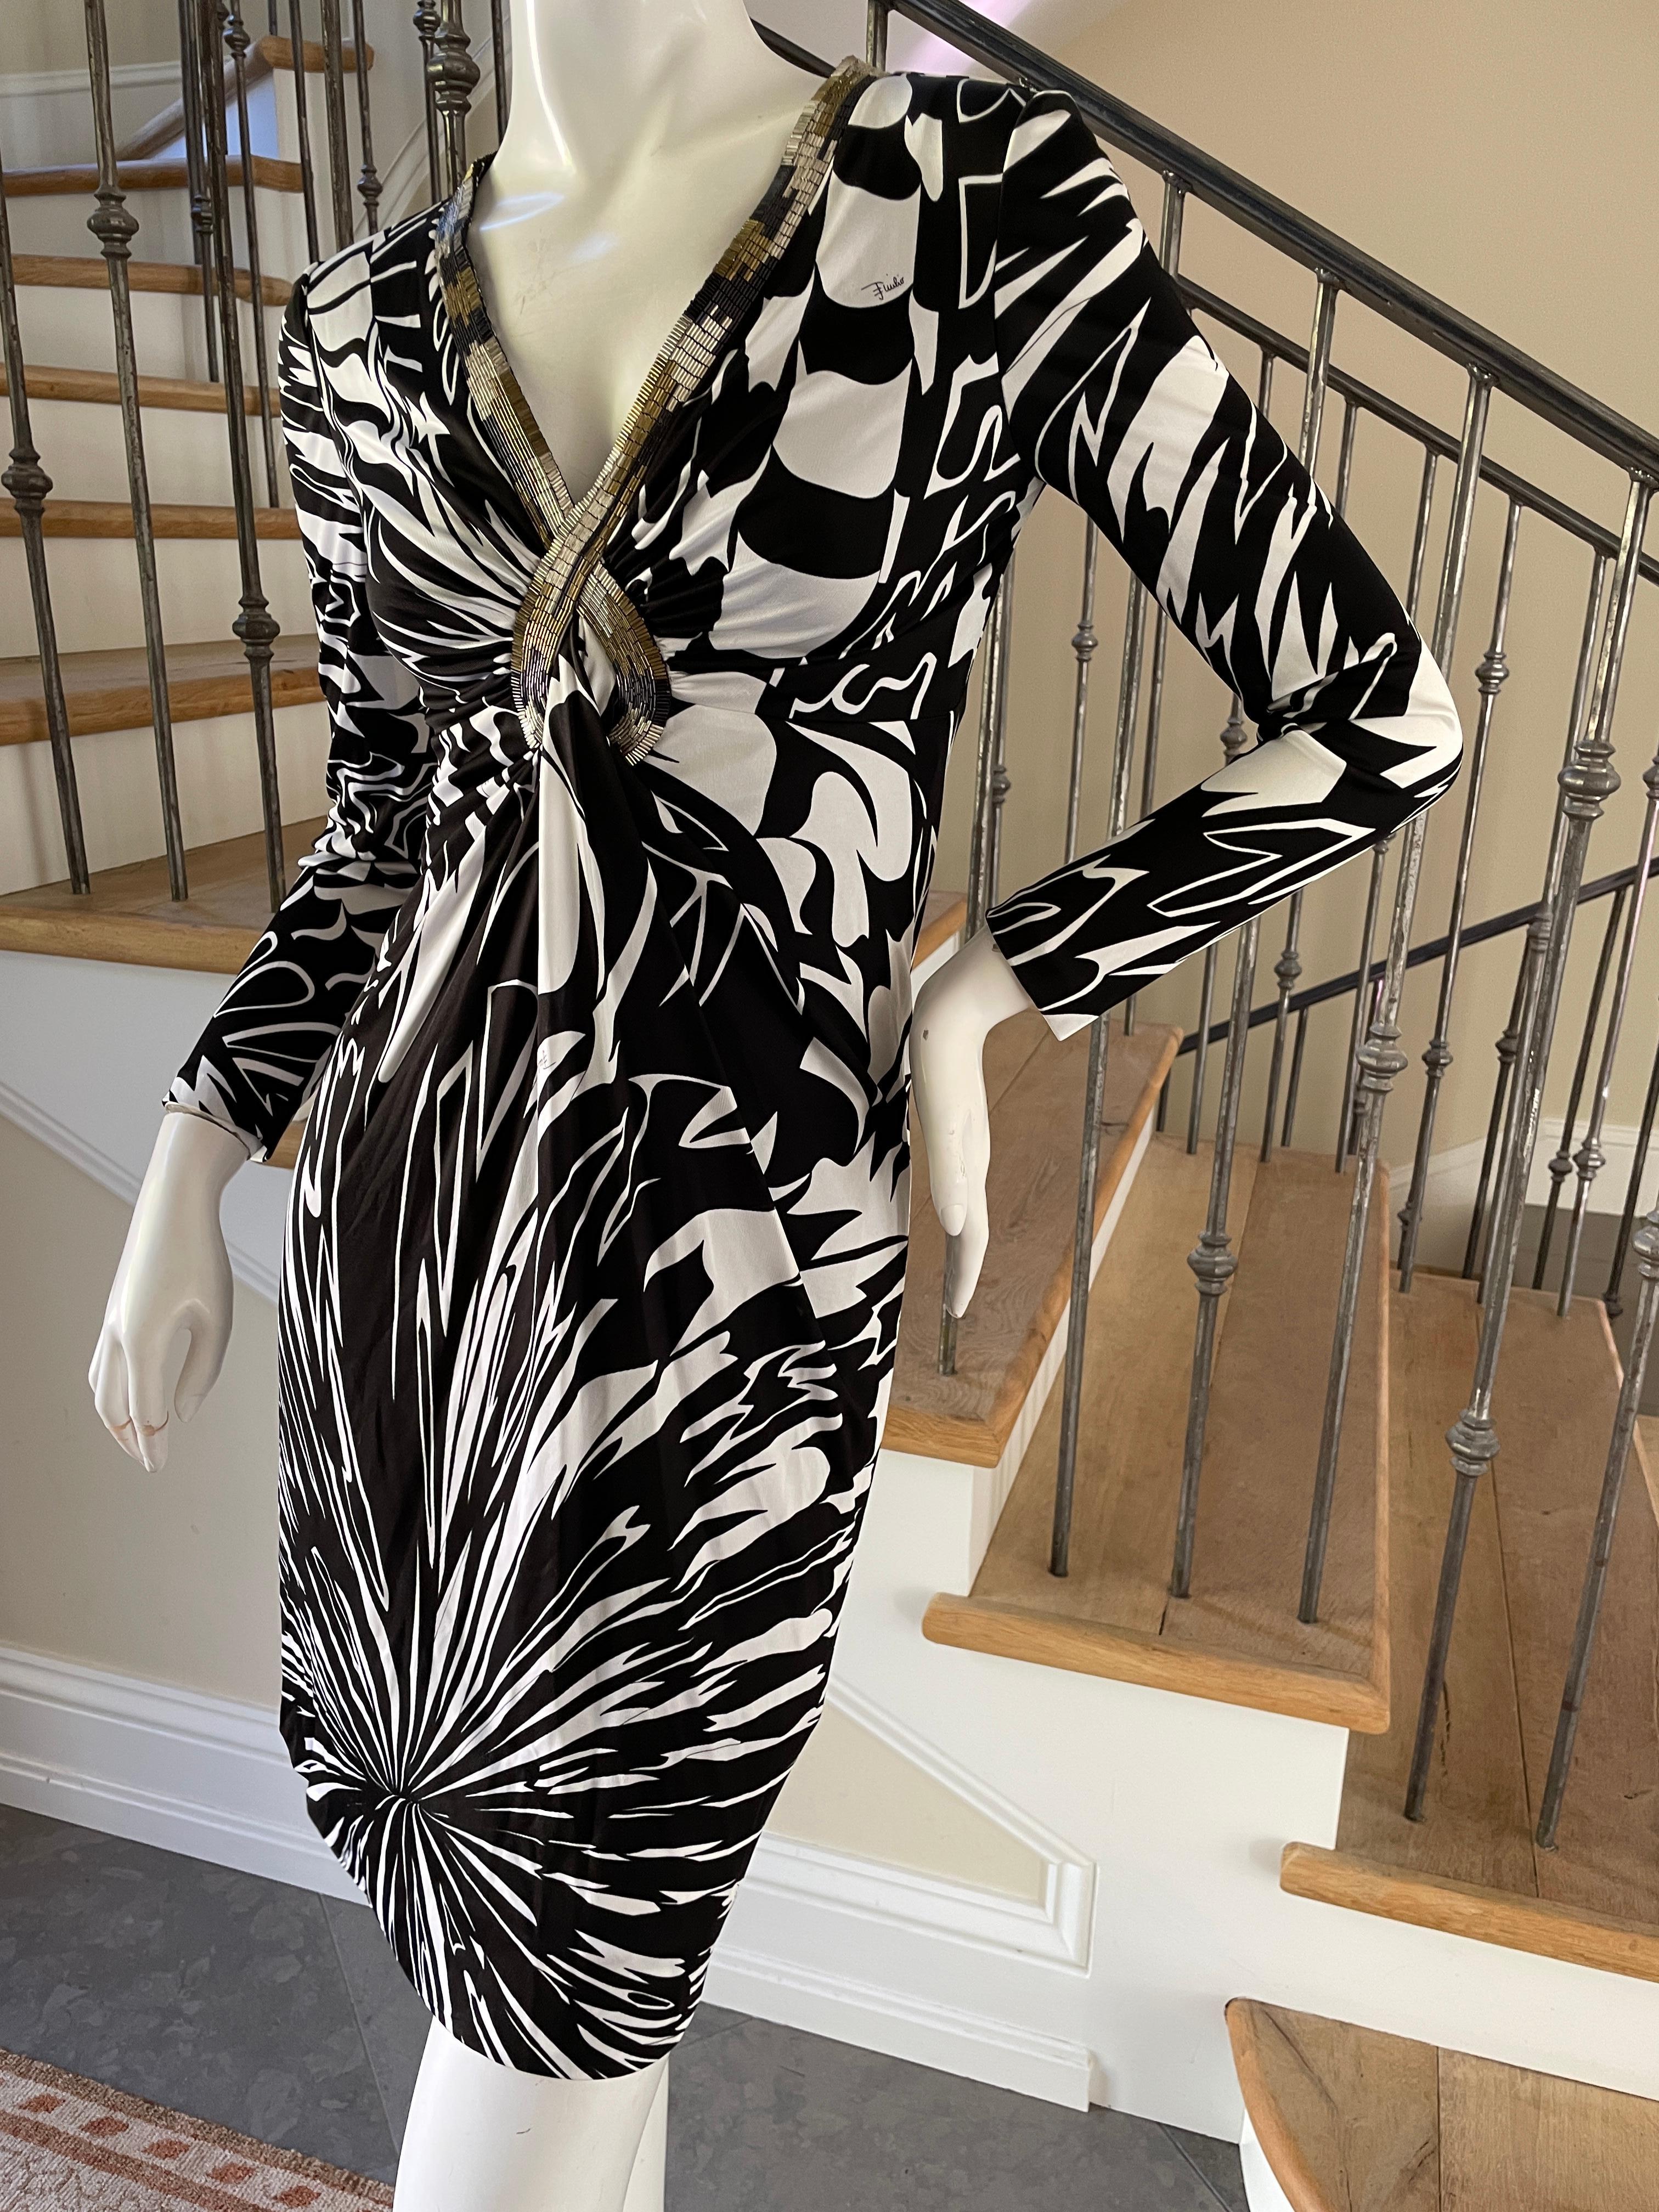 Emilio Pucci Beaded Plunging Op Art Pattern Cocktail Dress In Excellent Condition For Sale In Cloverdale, CA